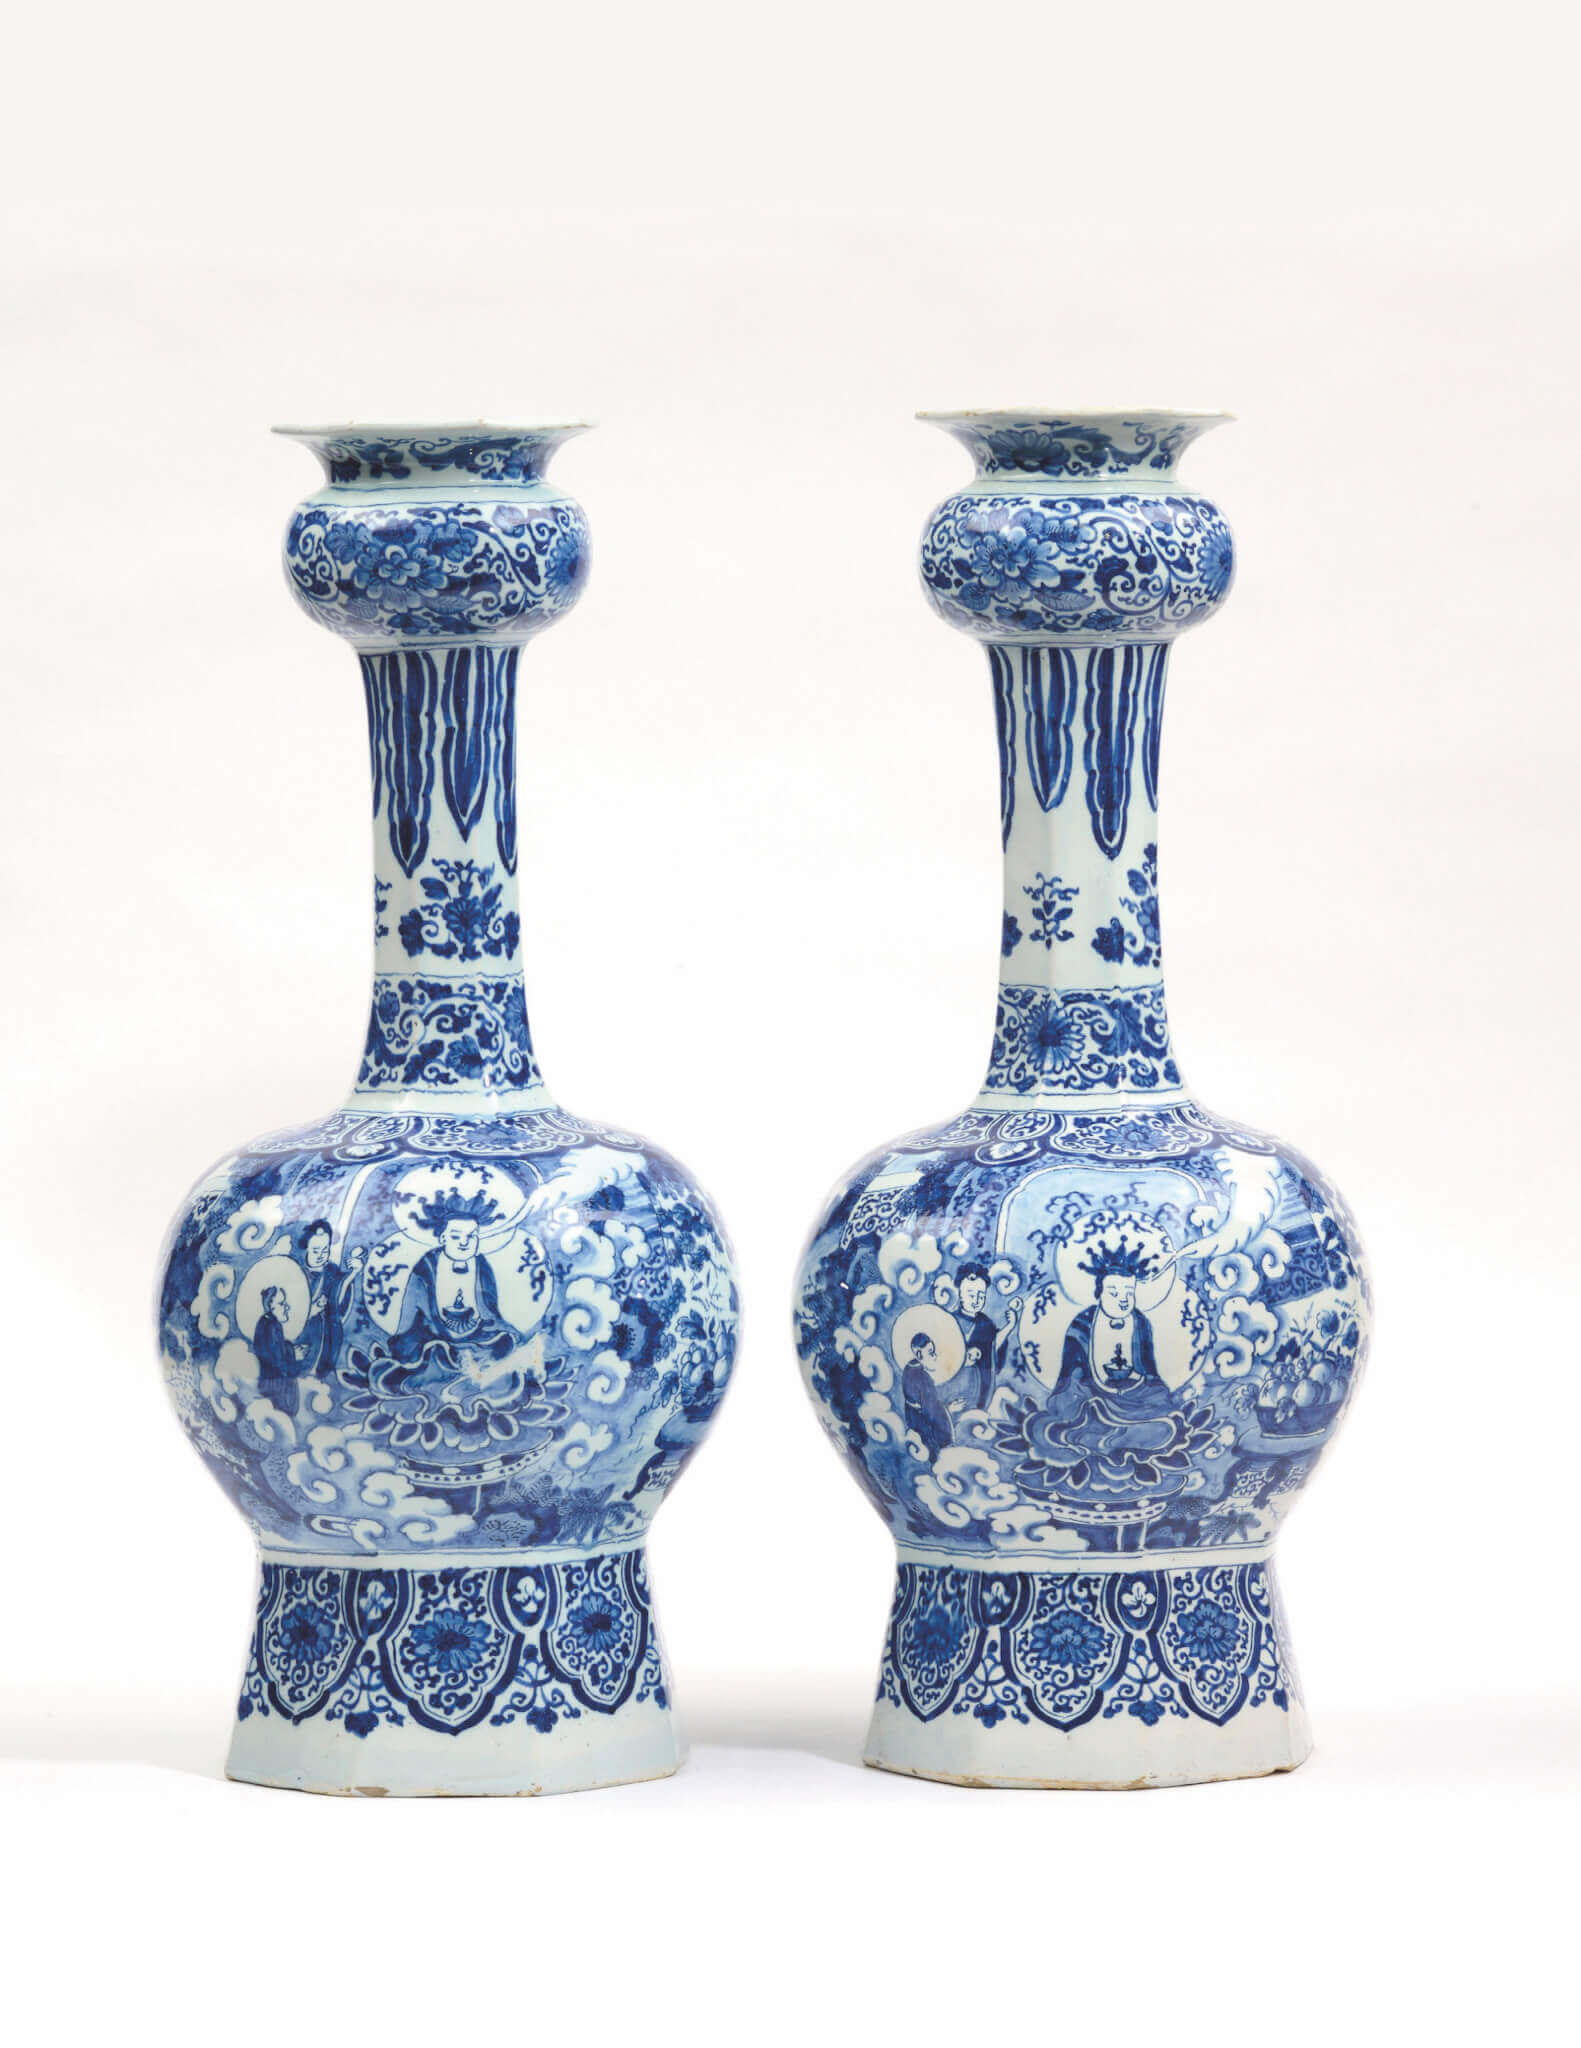 Pair of blue and white octagonal vases